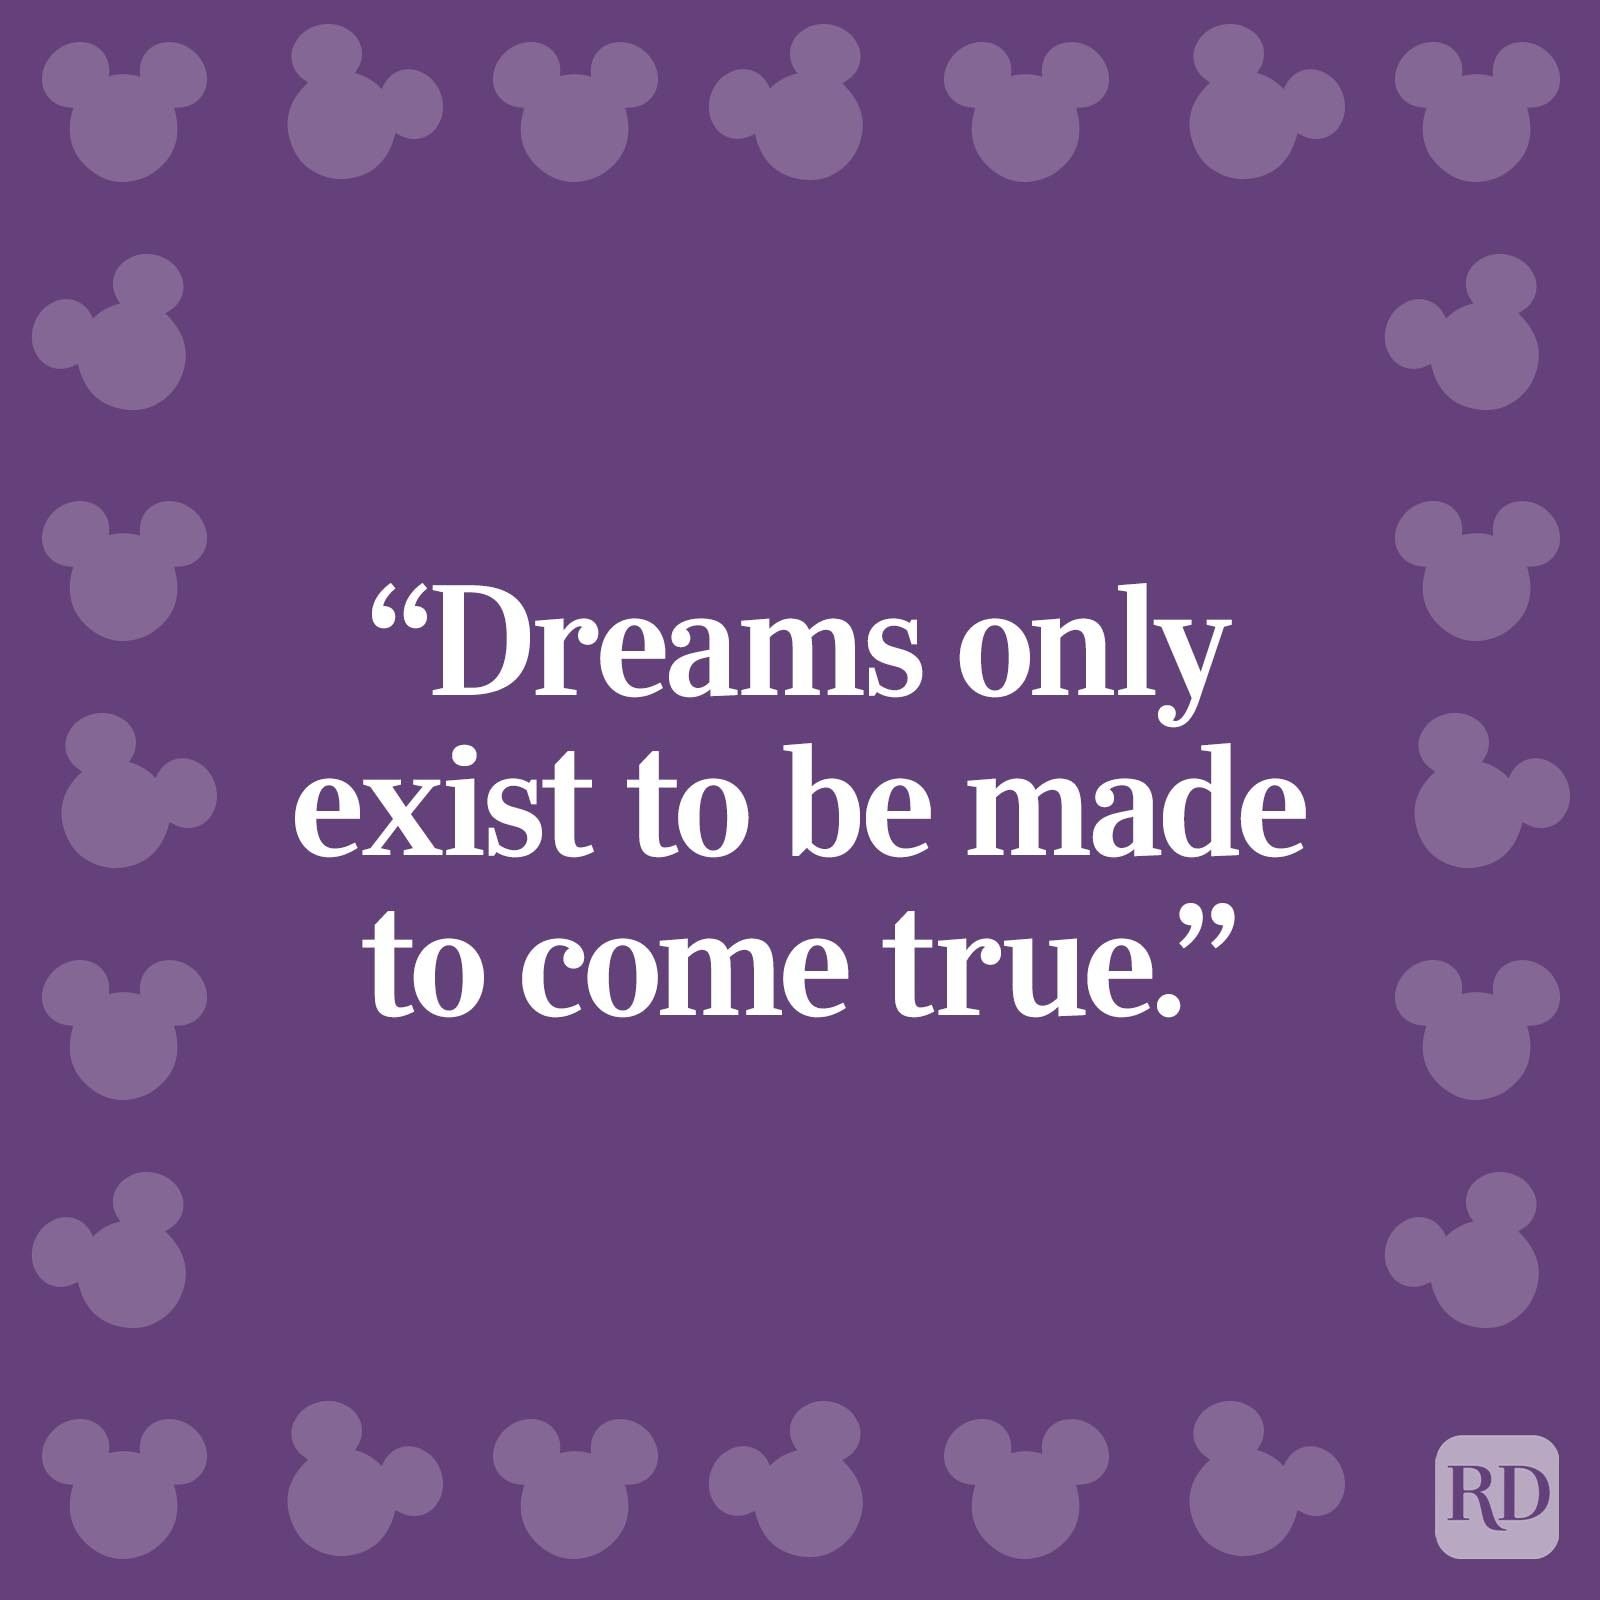 "Dreams only exist to be made to come true."